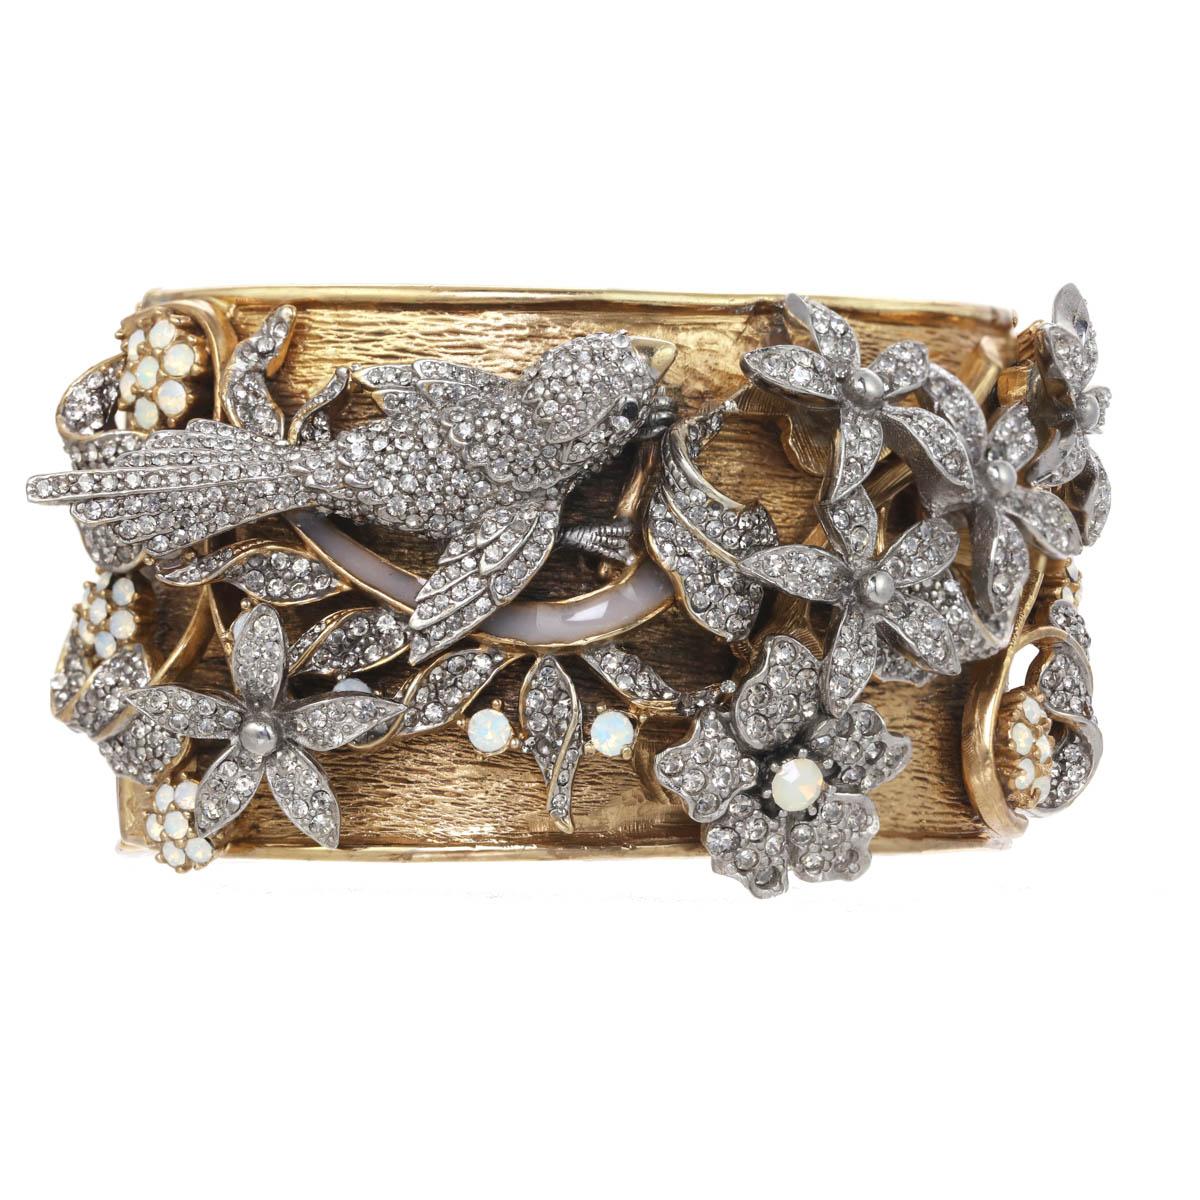 The enchanting Bethesda Cuff, from season I of the Ines x Ciner collaboration, tells the story of a love bird longing for its other half. The cuff is quite stunning with accented rhinestones that play in perfect harmony against pearlized